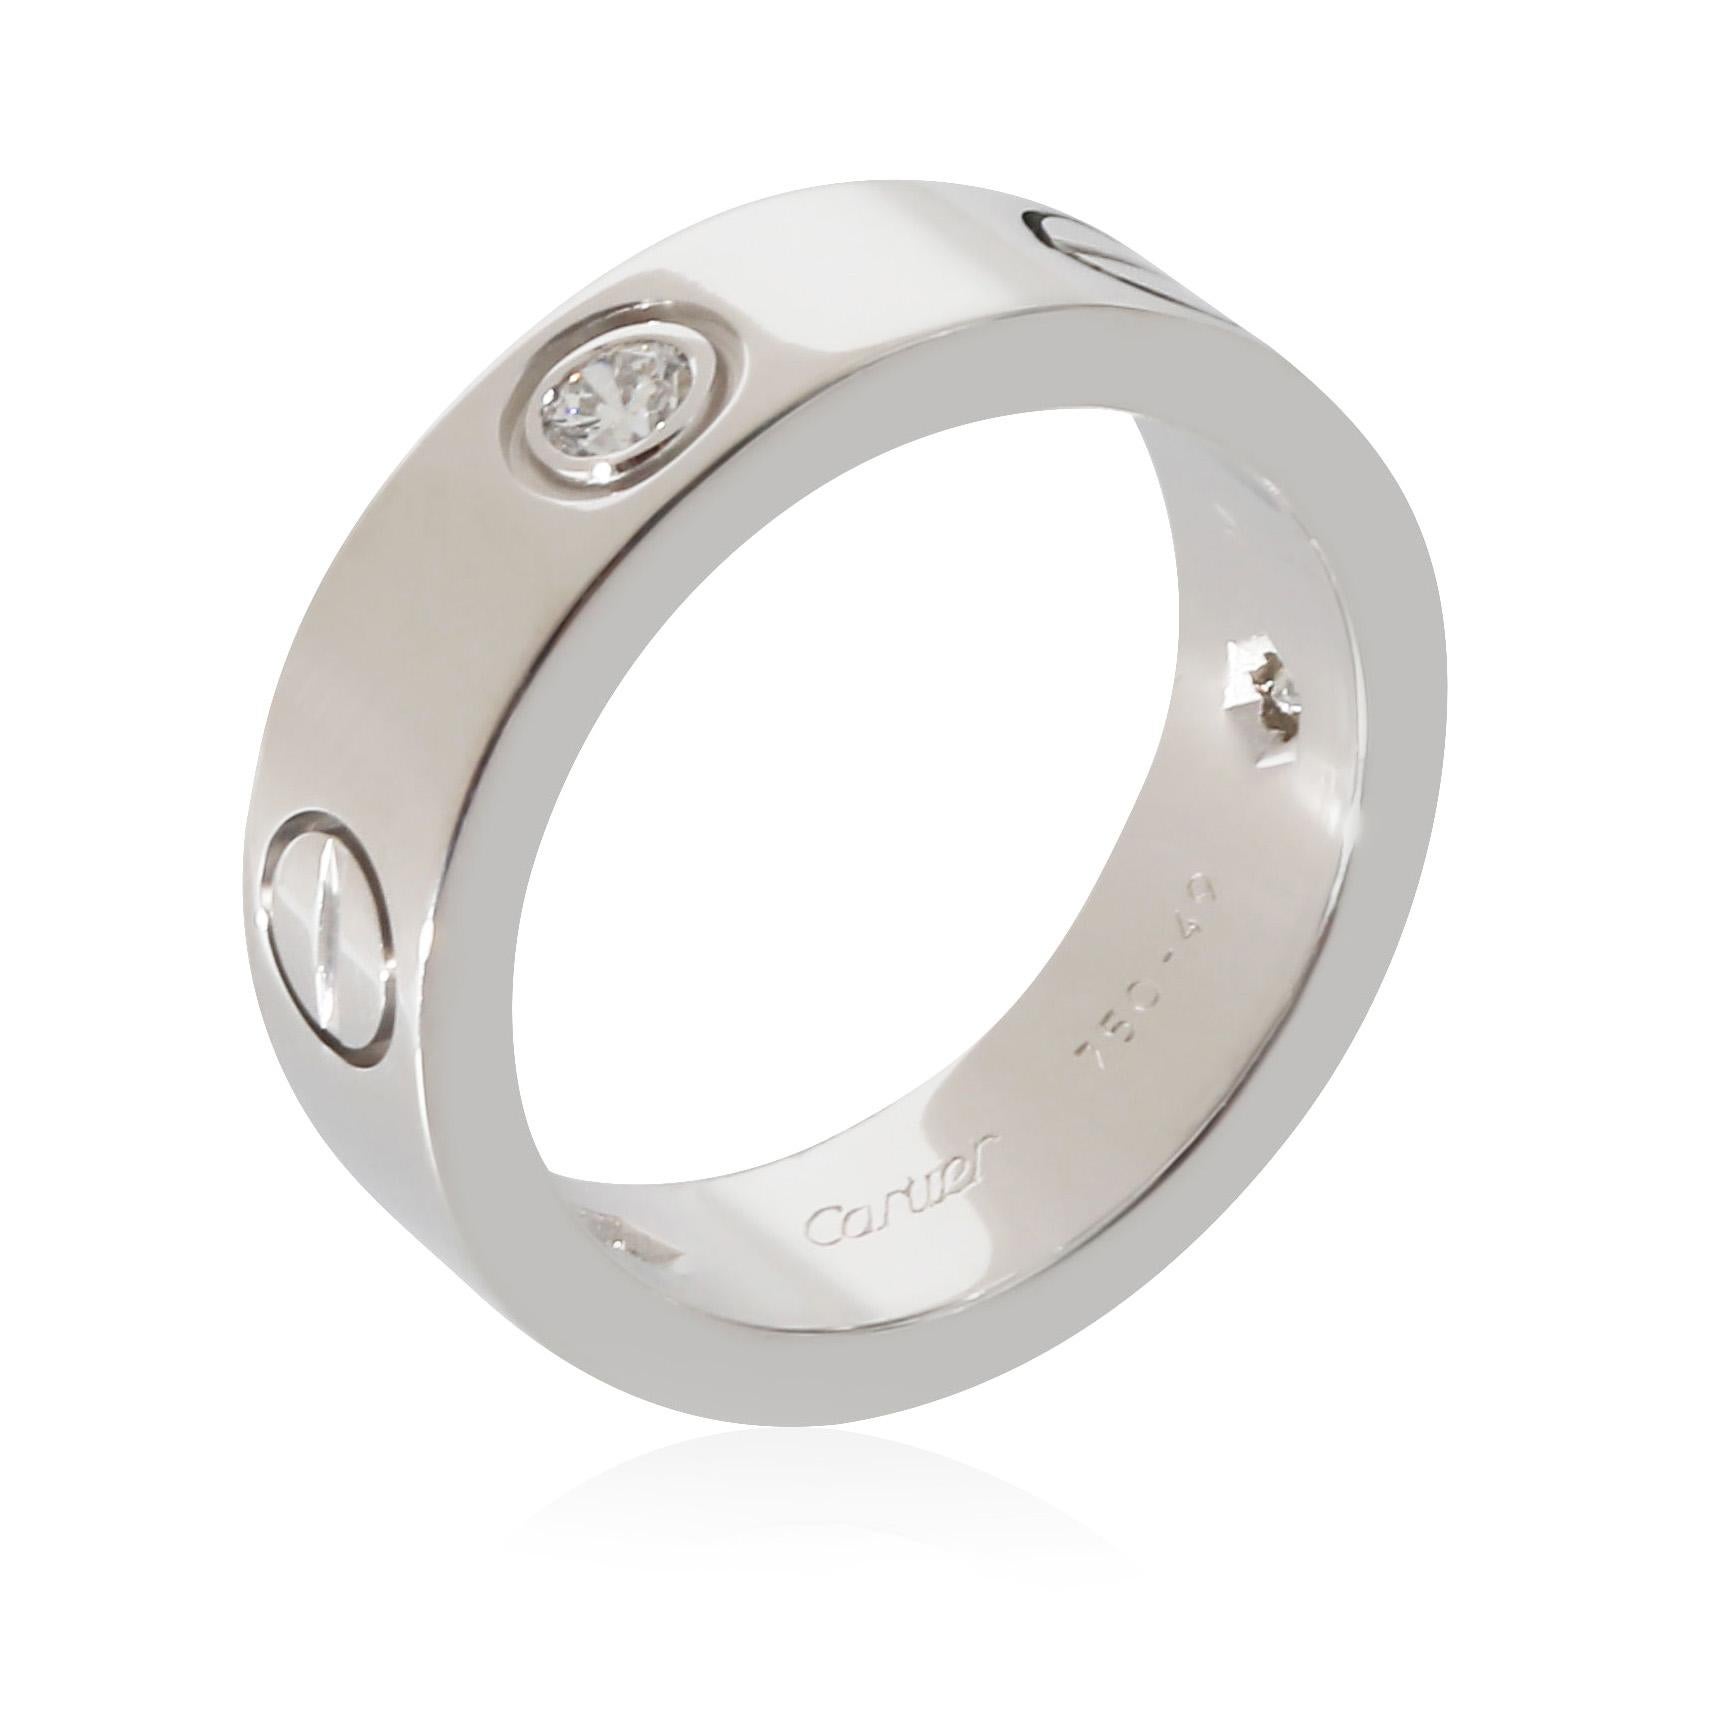 Cartier Love Ring in 18k White Gold 0.22 CTW

PRIMARY DETAILS
SKU: 133988
Listing Title: Cartier Love Ring in 18k White Gold 0.22 CTW
Condition Description: Cartier's Love collection is the epitome of iconic, from the recognizable designs to the